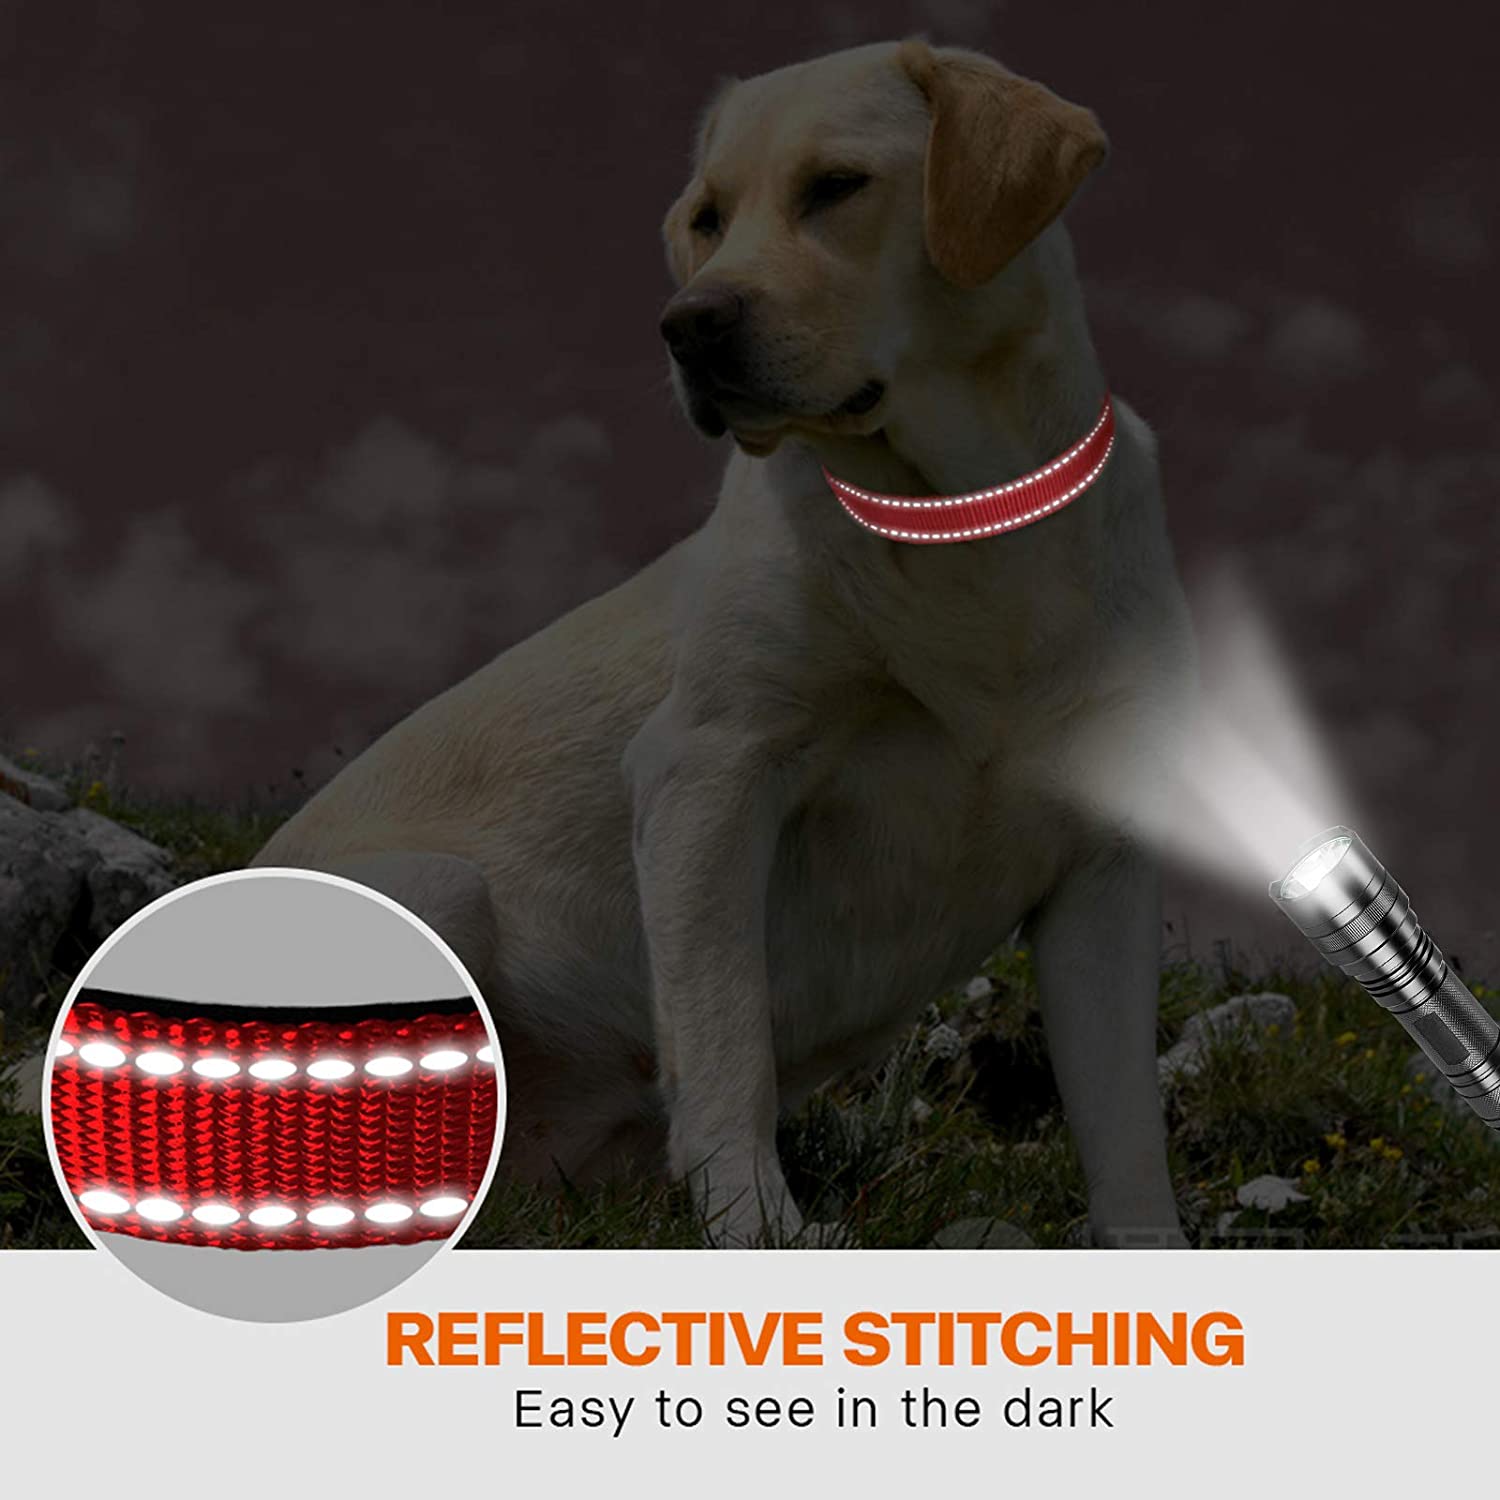 Reflective Dog Collar with Safety Locking Buckle